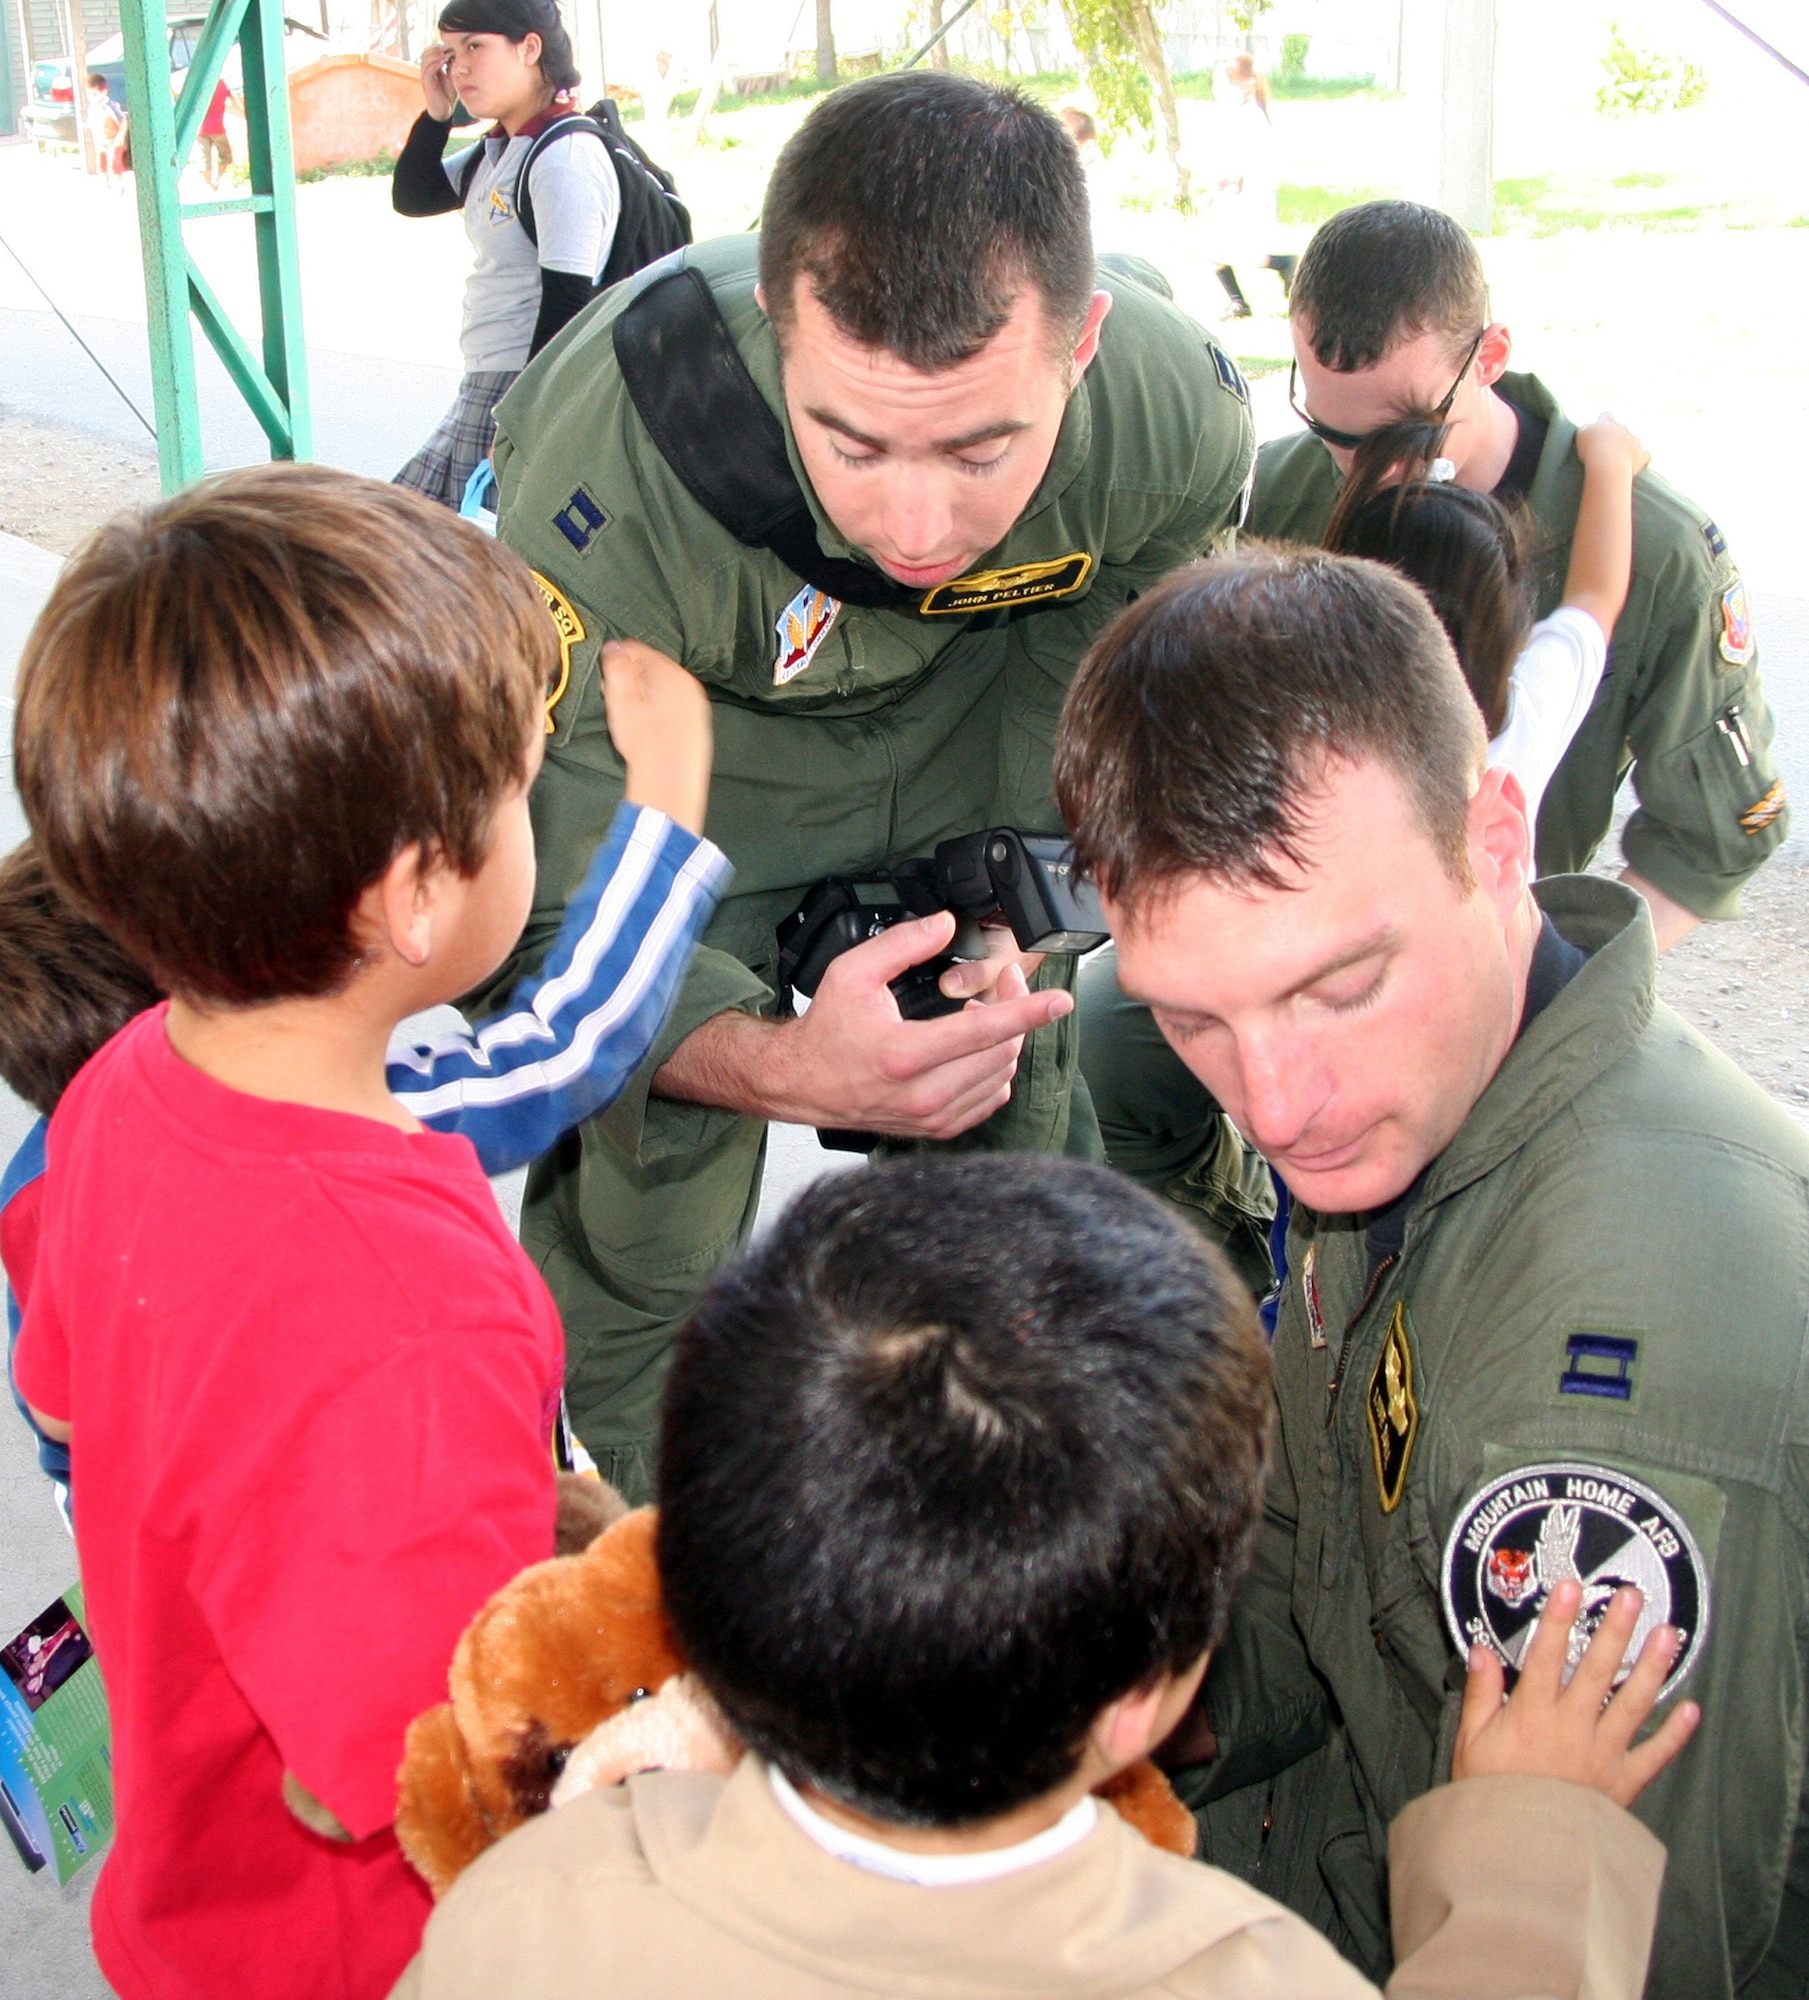 SANTIAGO, Chile – Capts. John Peltier and Luke Ball, 391st Fighter Squadron, show off their squadron patches to Chilean orphans April 3. The captains are here in support of the largest South American airshow, FIDAE, where they are showcasing F-15E aircraft to international audiences.  (U.S Air Force photo by/1st Lt. Candace Cutrufo)